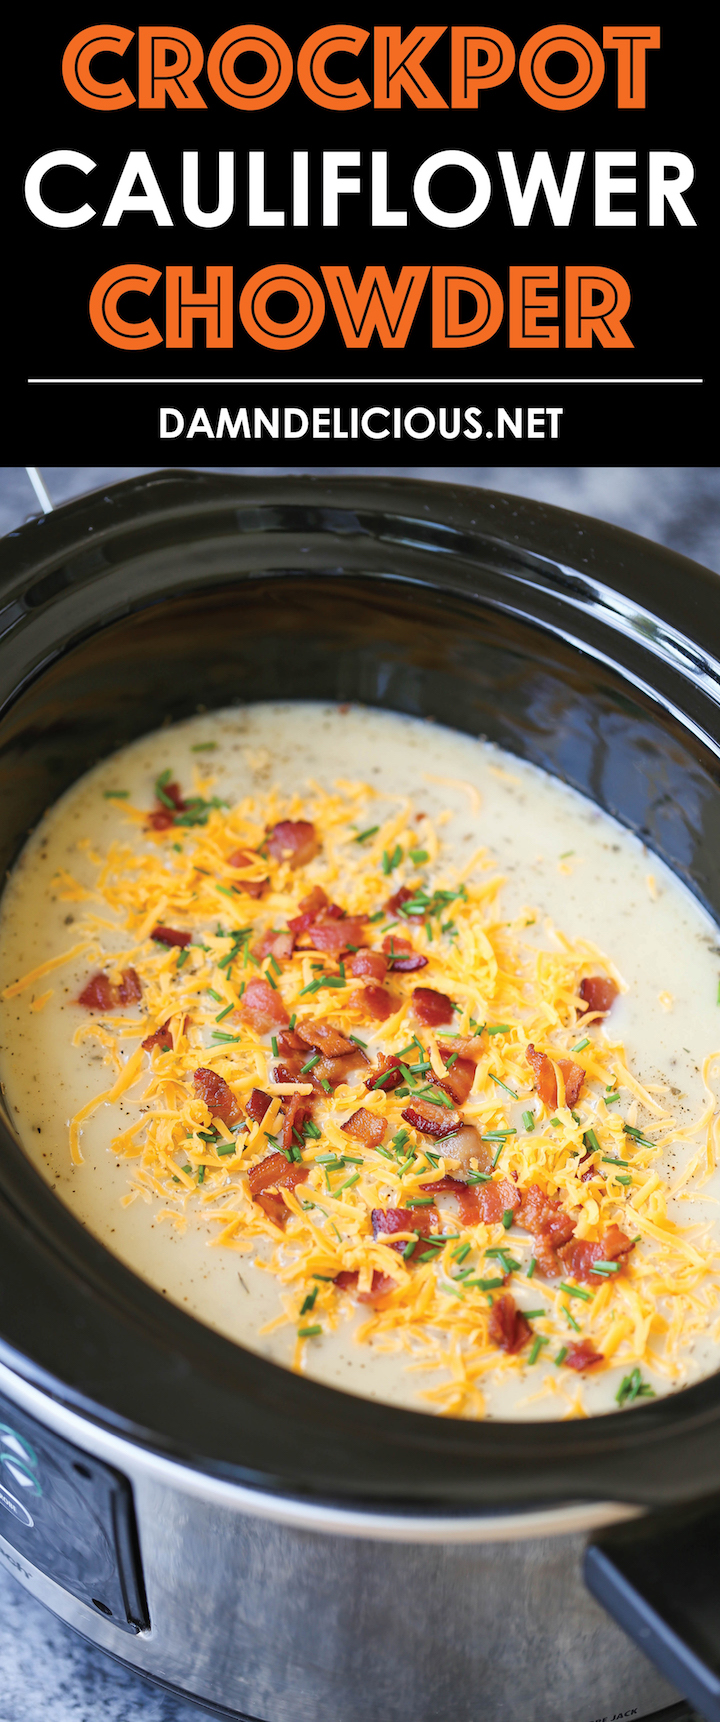 Slow Cooker Cauliflower Chowder - Simply throw everything into the crockpot, blend and top with bacon and cheese. Healthy, hearty, easy and effortless!